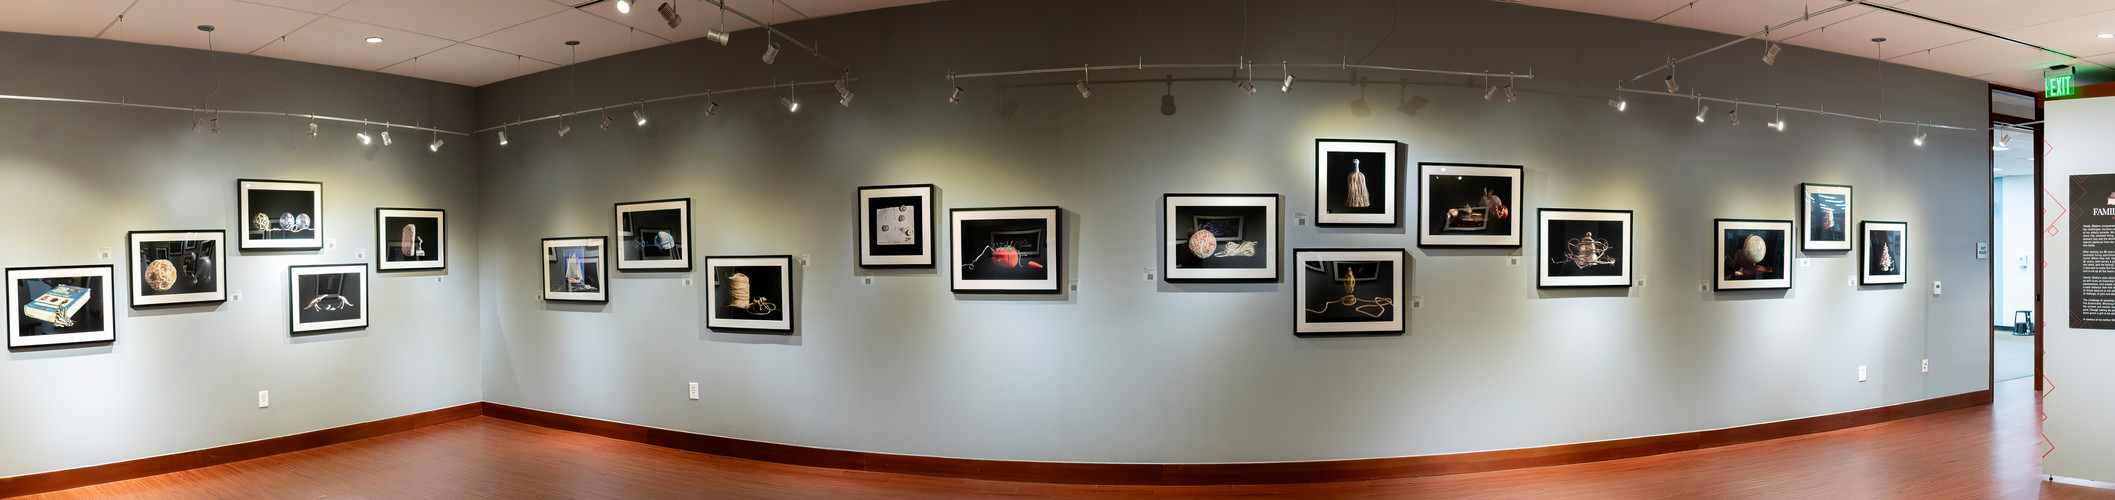 installation view of the back with several framed pictures of Jane Szabo's art work